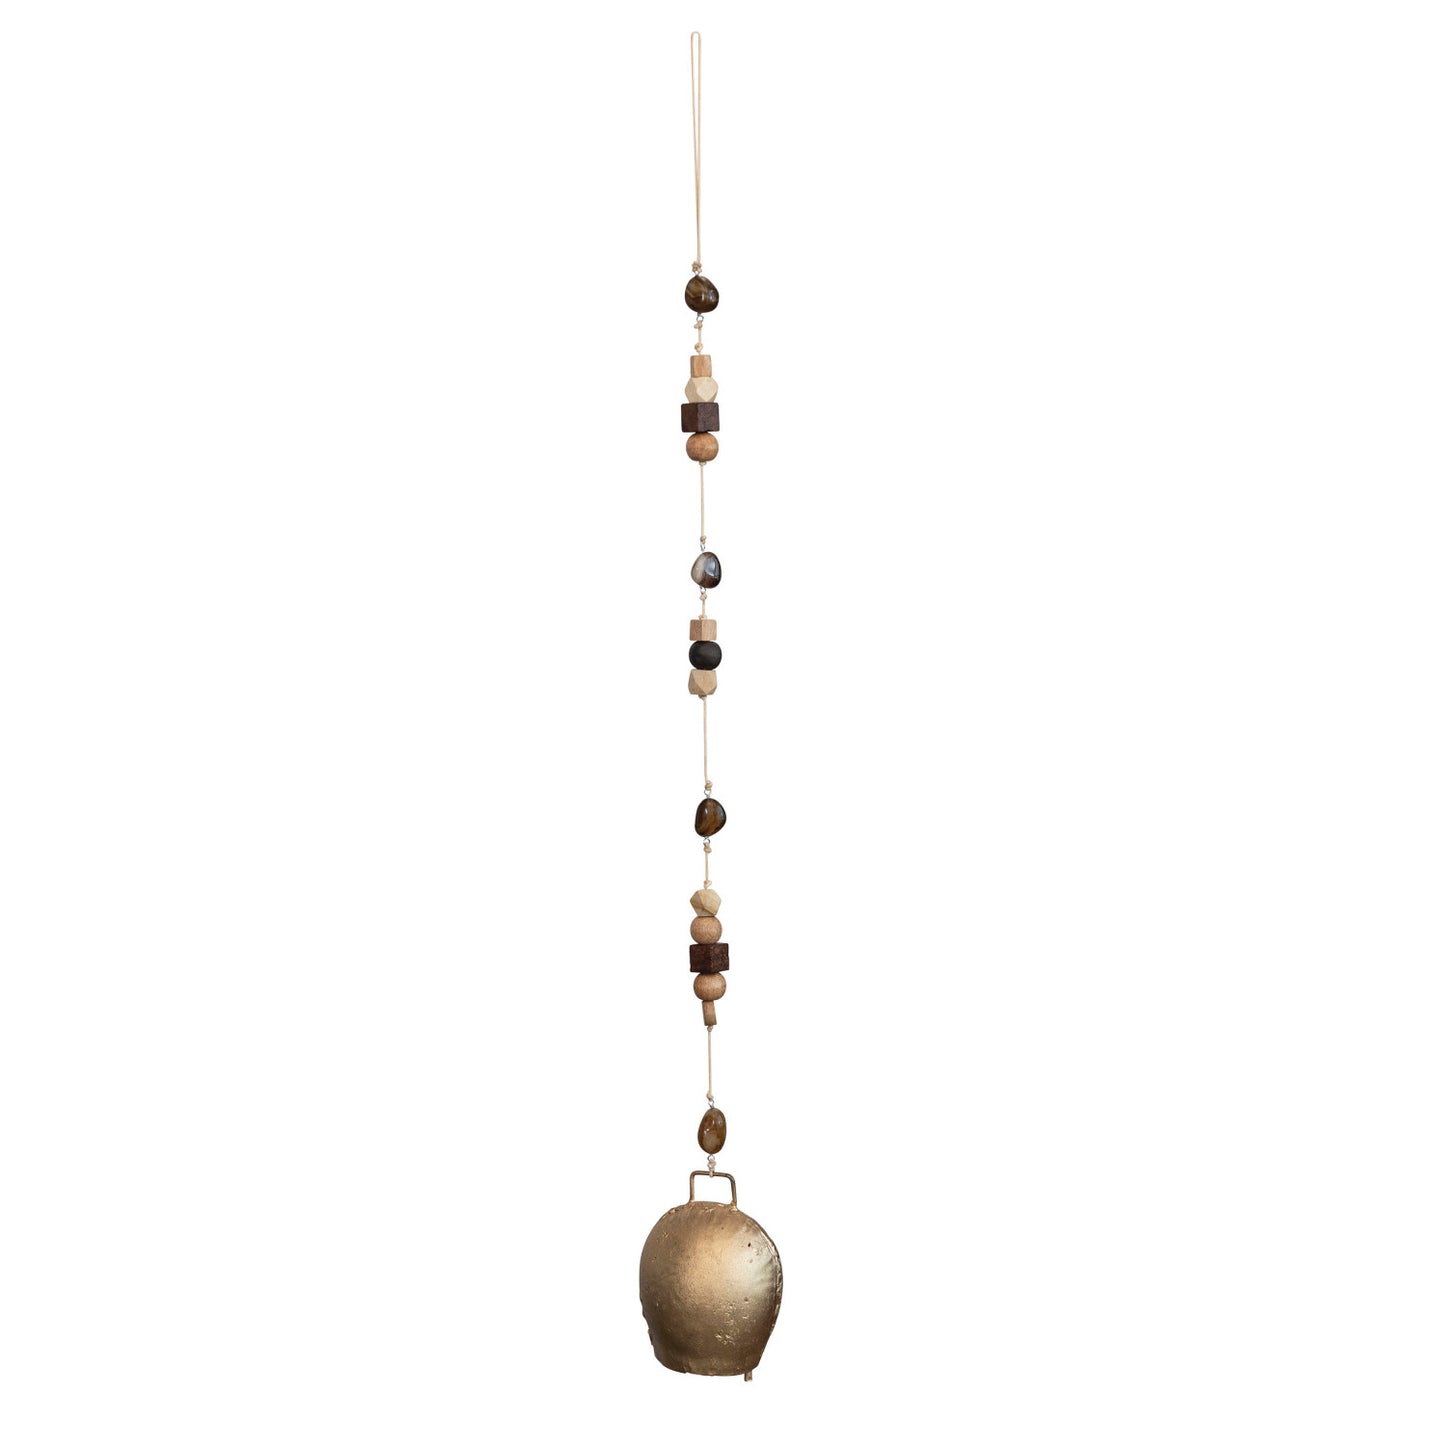 Hanging Metal Bell W/ Agate Stones & Wood Beads